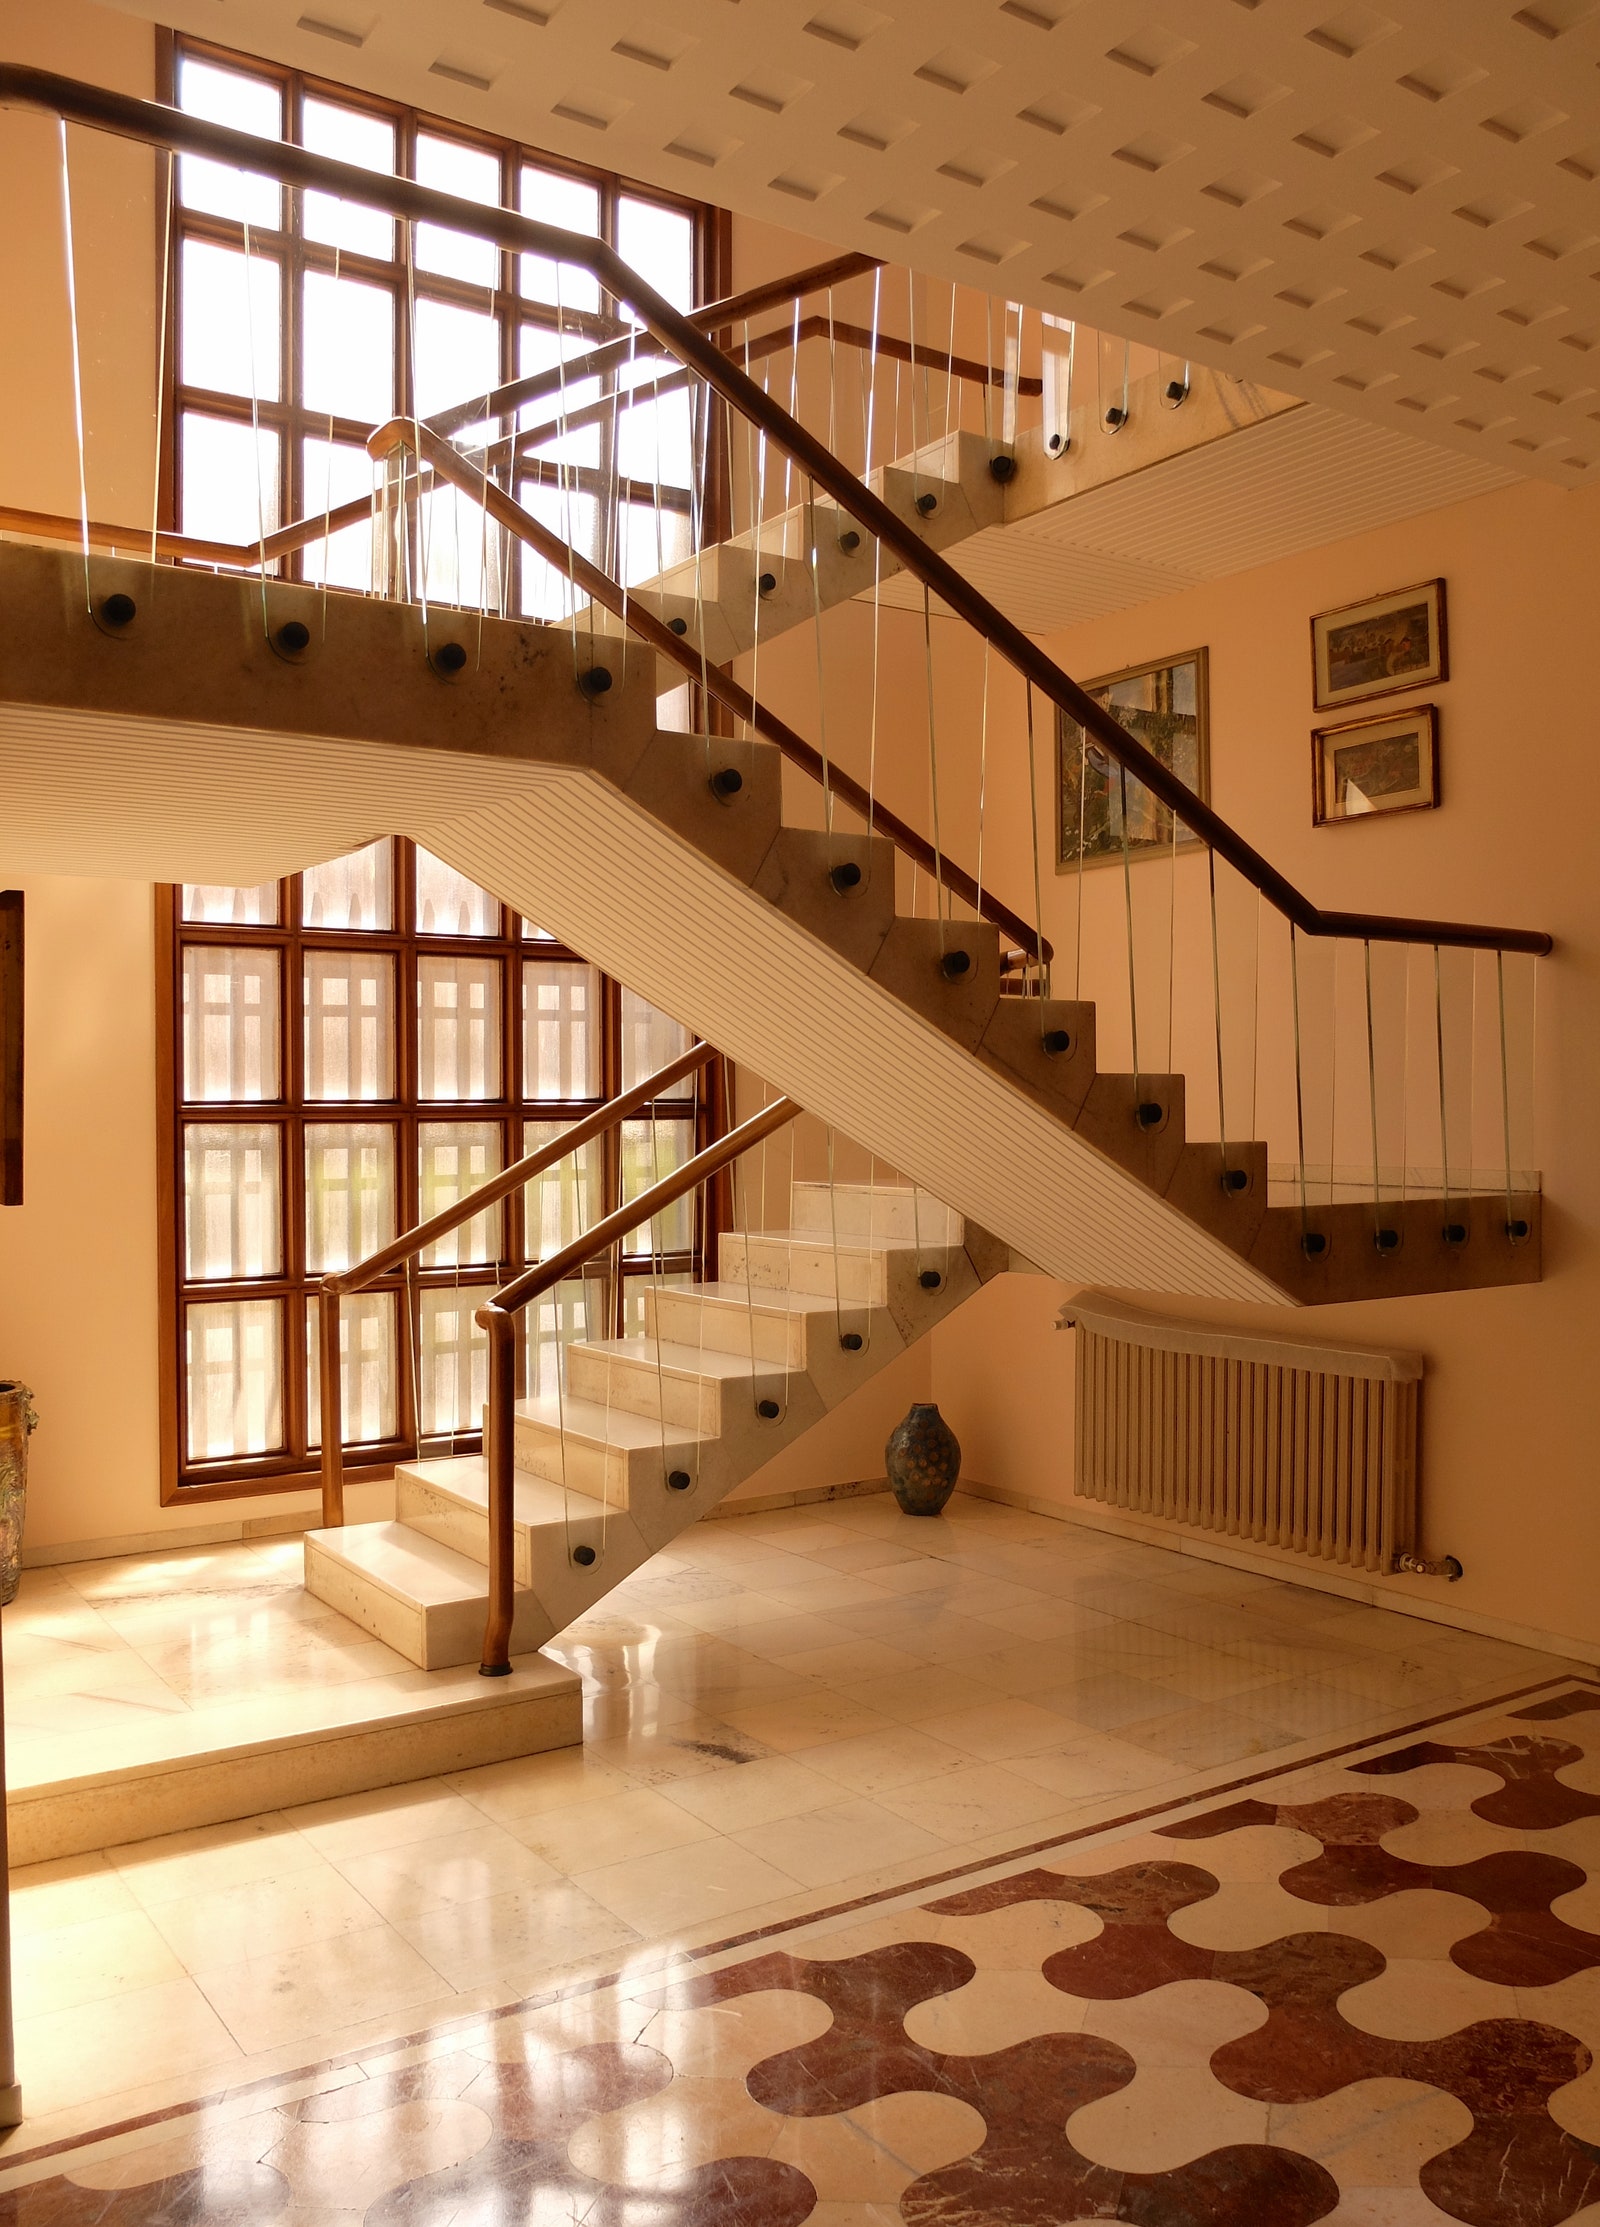 The central staircase with its walnut bannisters and Murano glass balustrade panels rises airily from the villas...